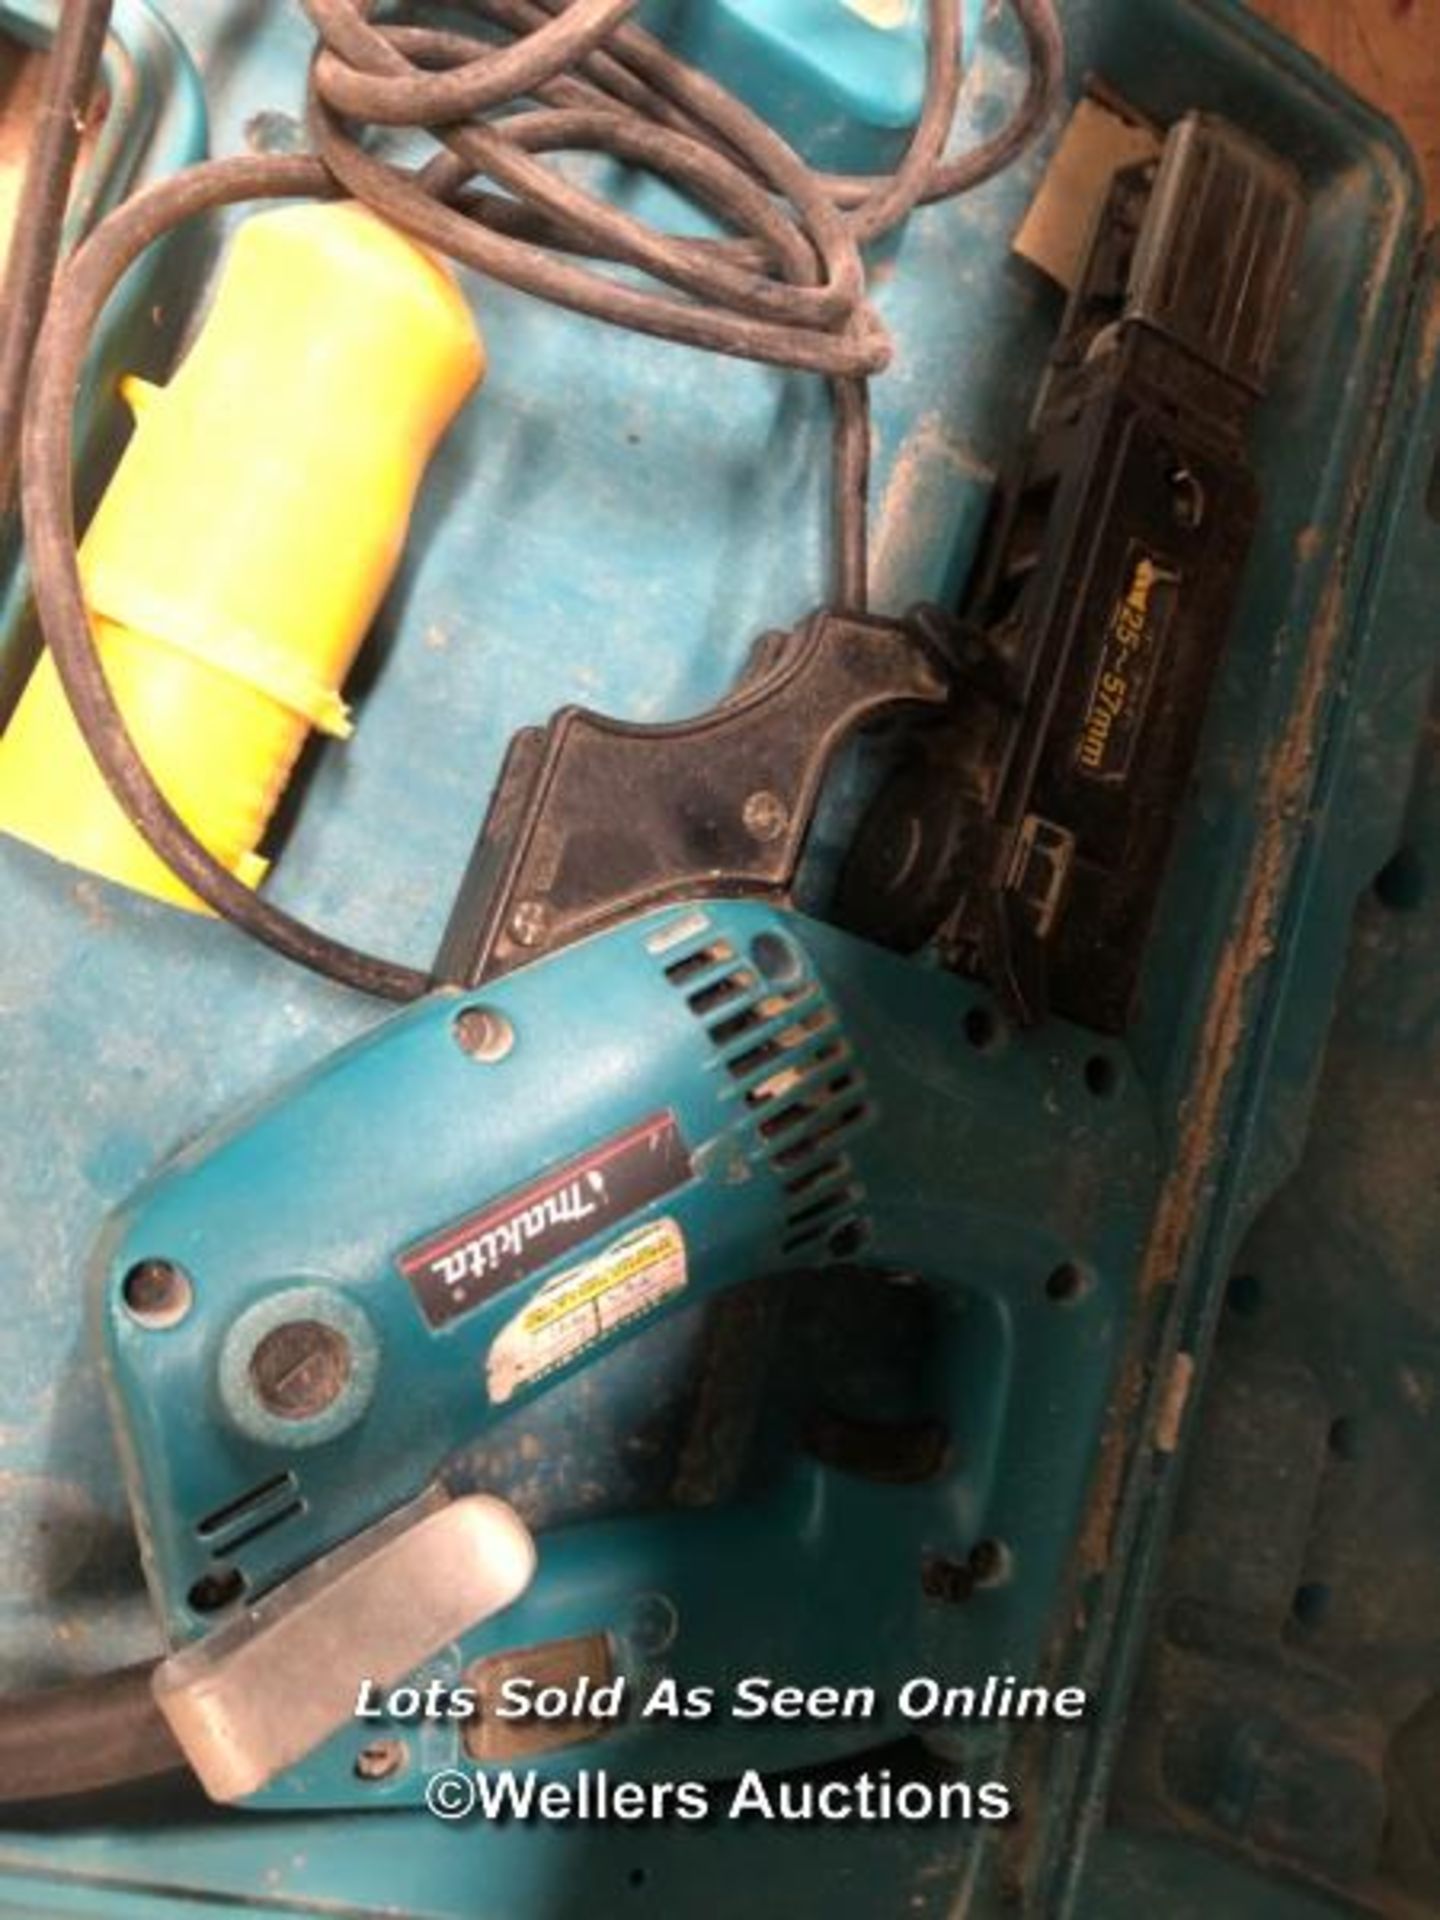 MAKITA 6834 AUTO FEED SCREWDRIVER, IN CASE - Image 2 of 3